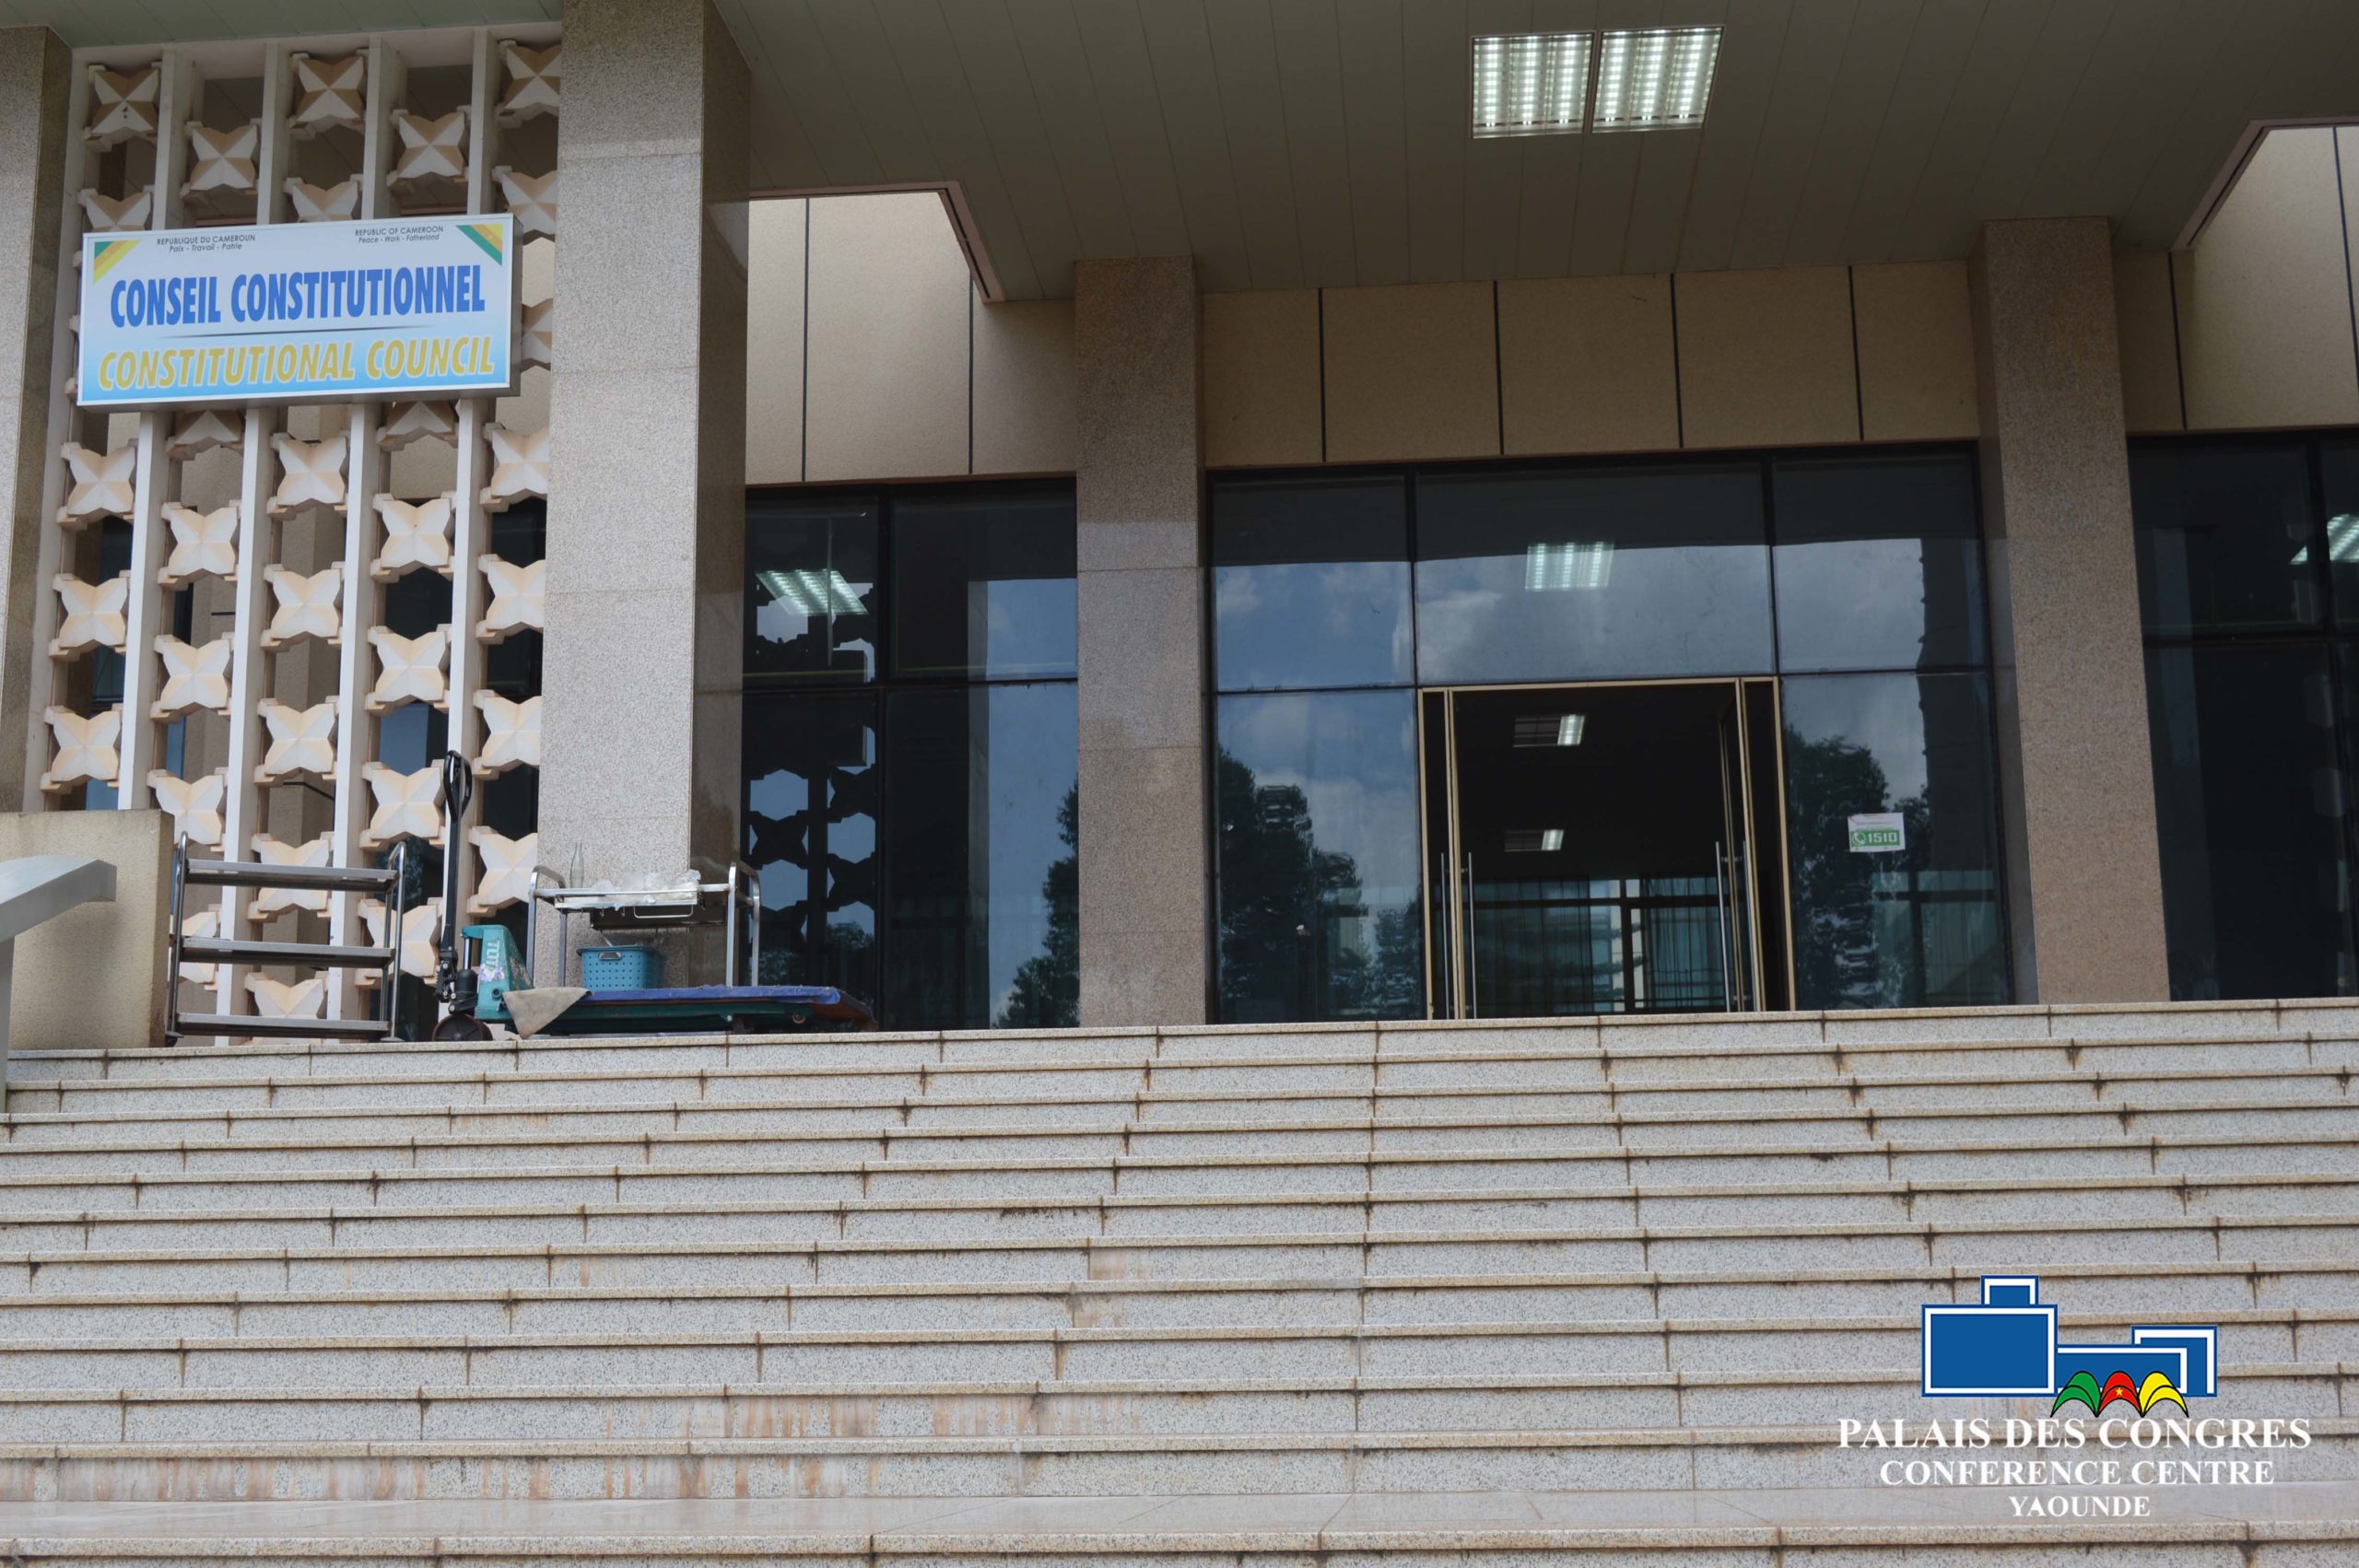 How the Yaounde Conference Centre manages the presence of sovereign institutions on its site 